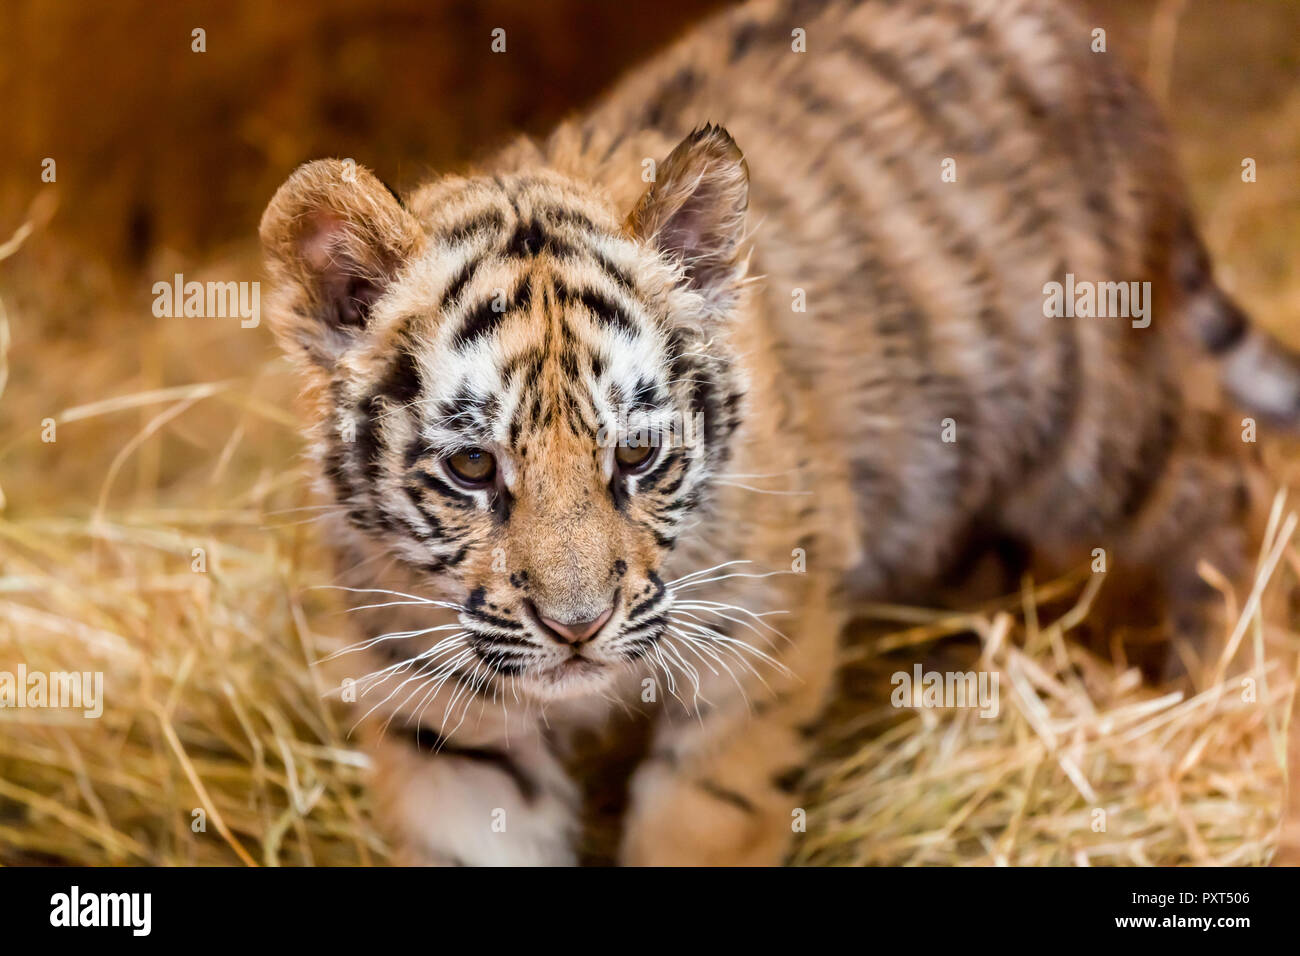 A baby tiger walking through hay looking very intent at its prey Stock Photo